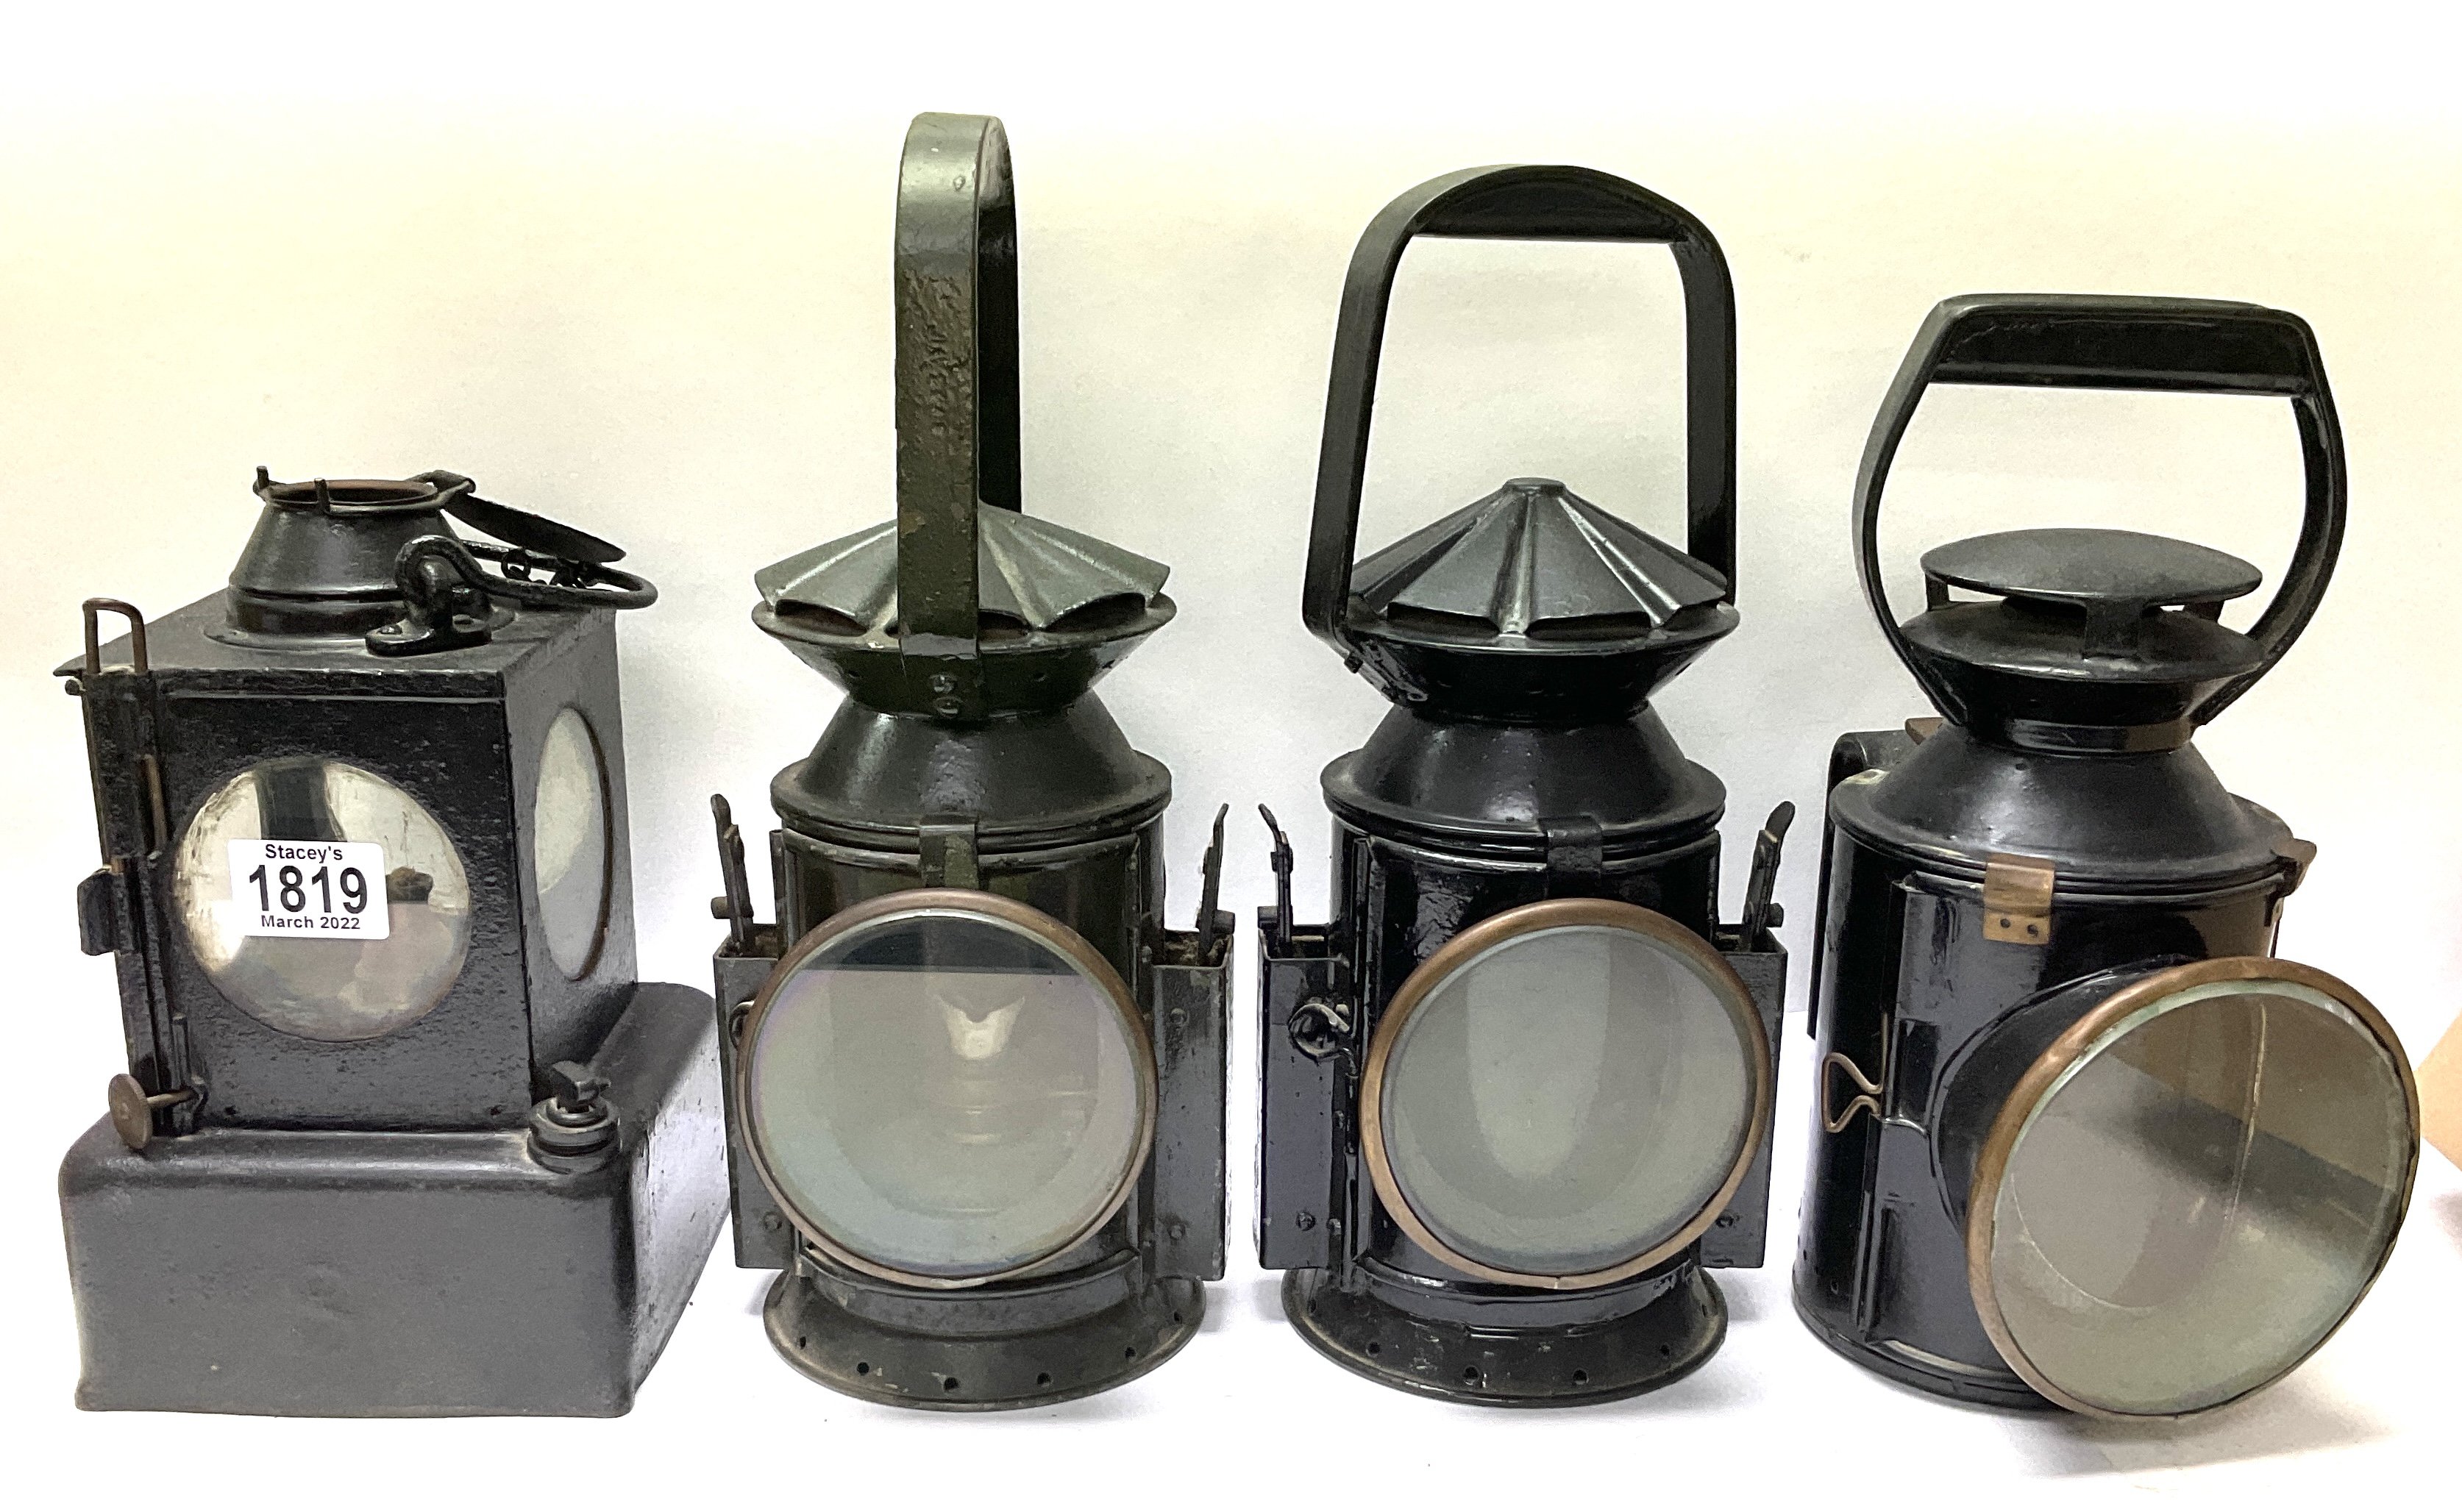 4 Antique Railway lanterns to include 1 LNER square body lantern, 2 Military issue signal lamps